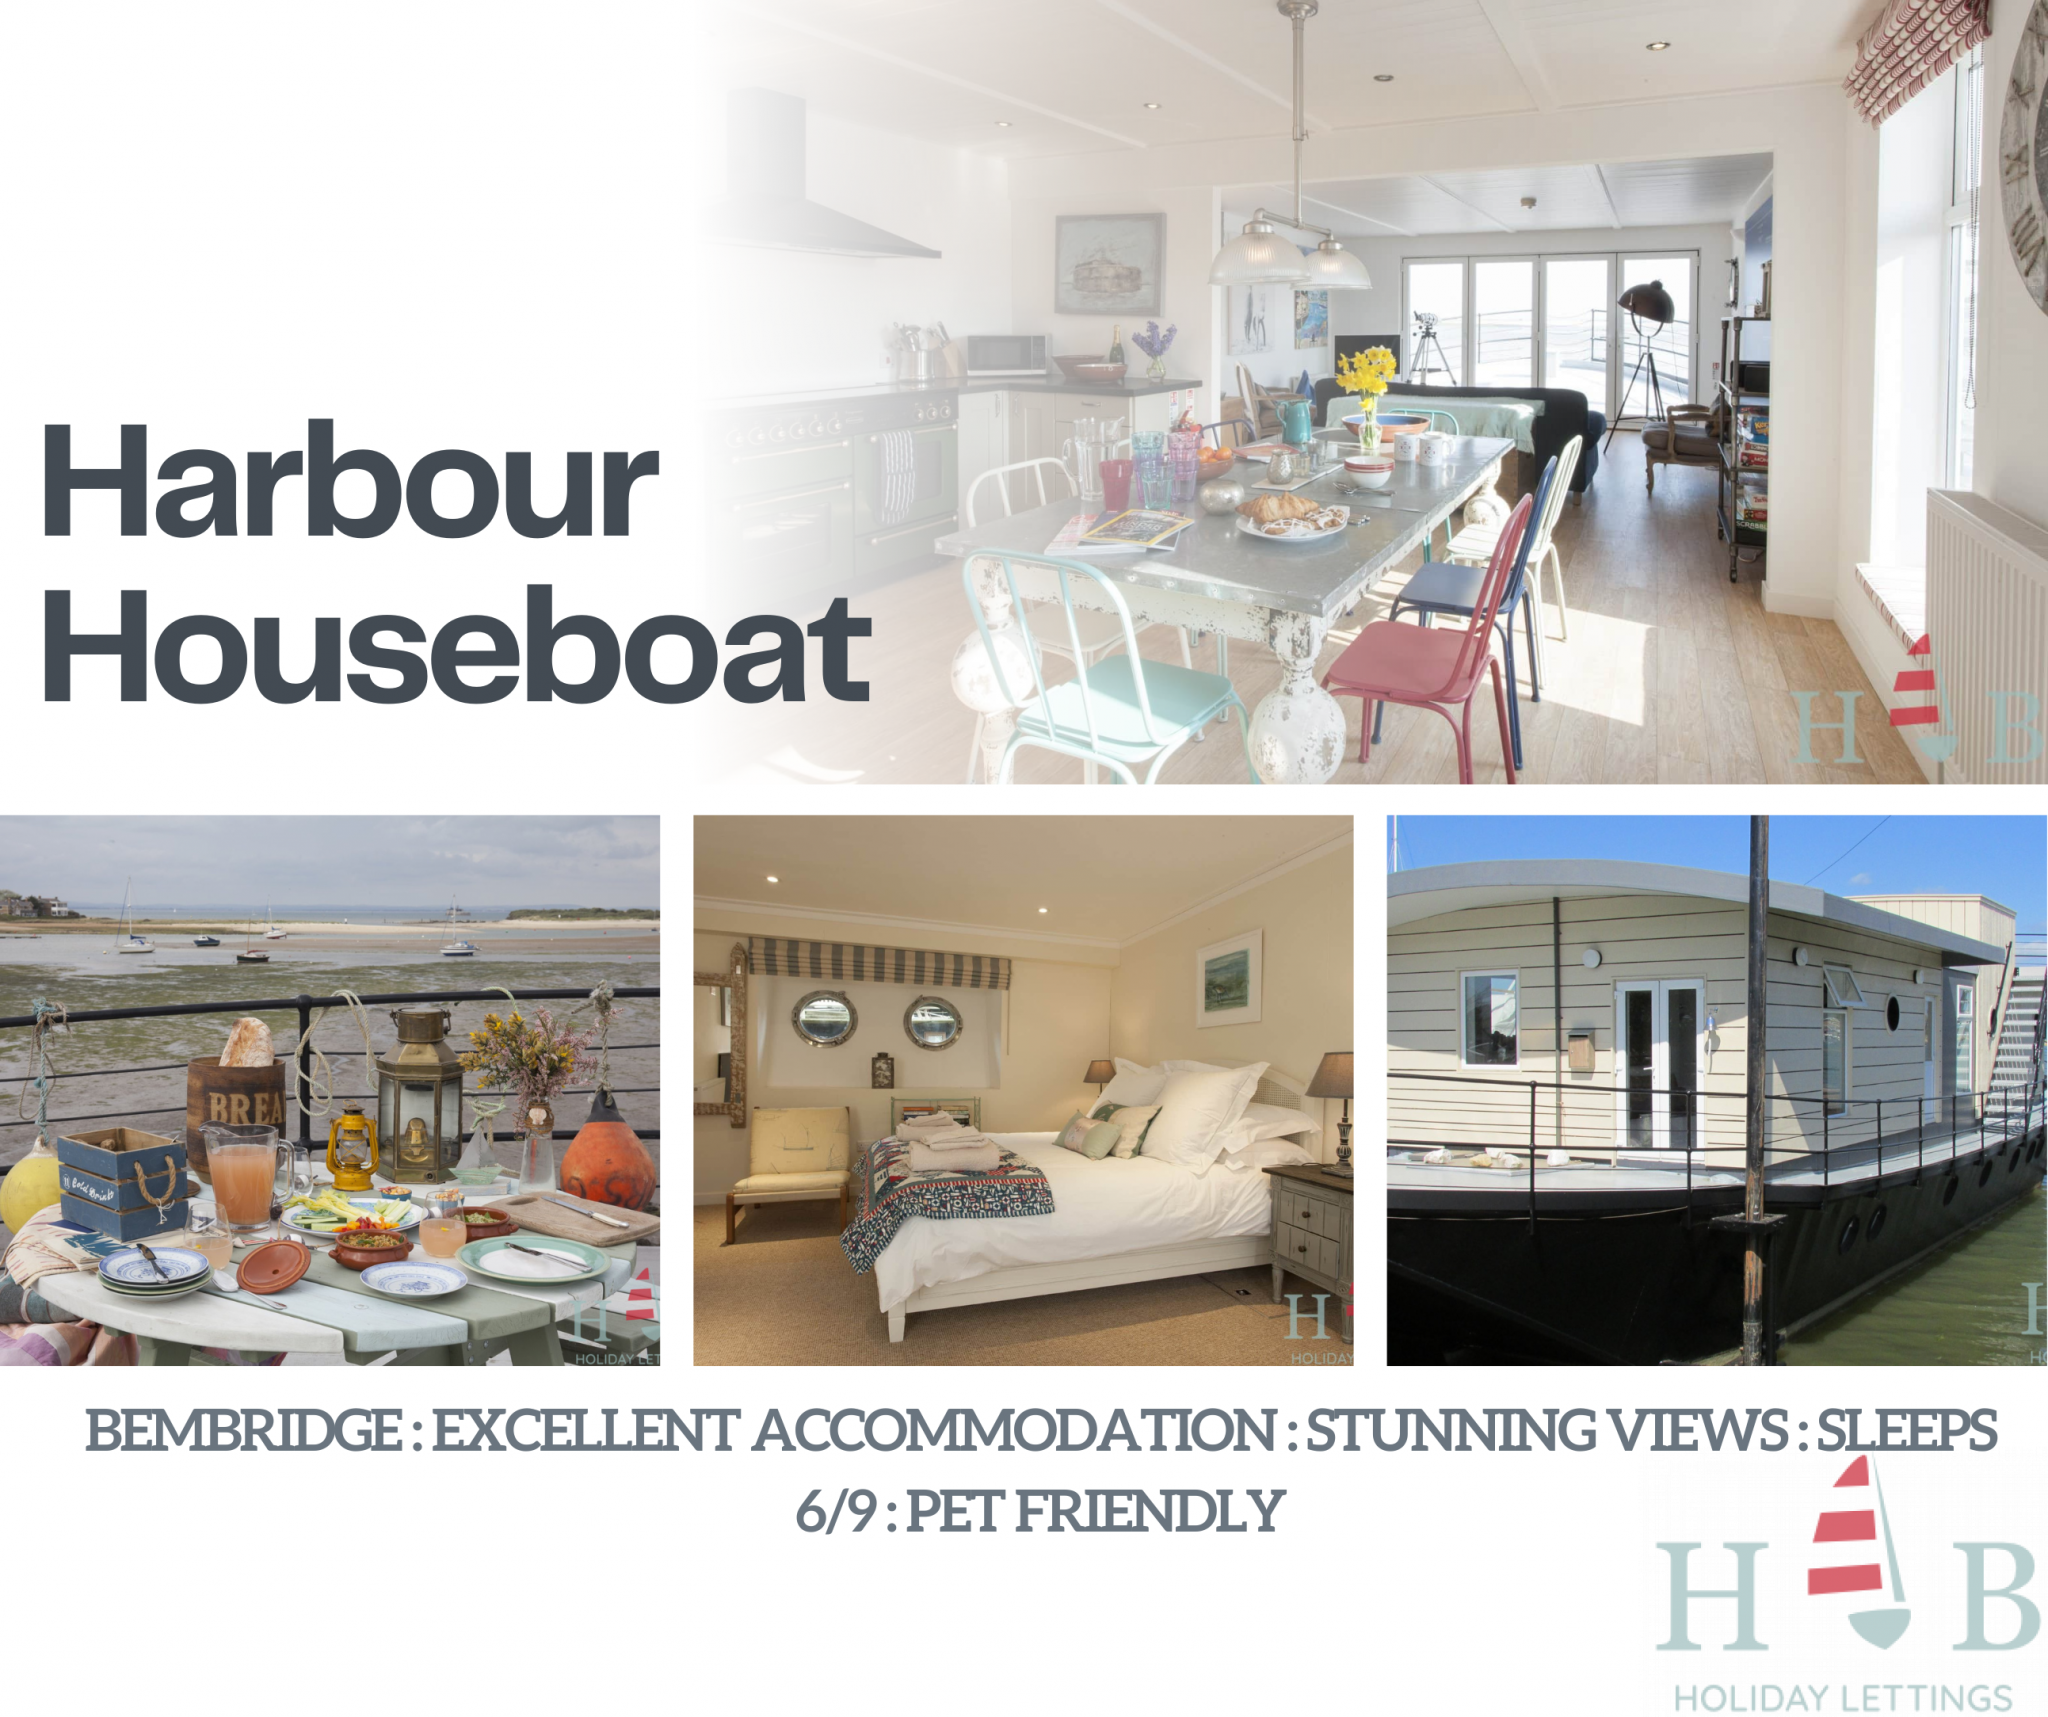 Harbour Houseboat